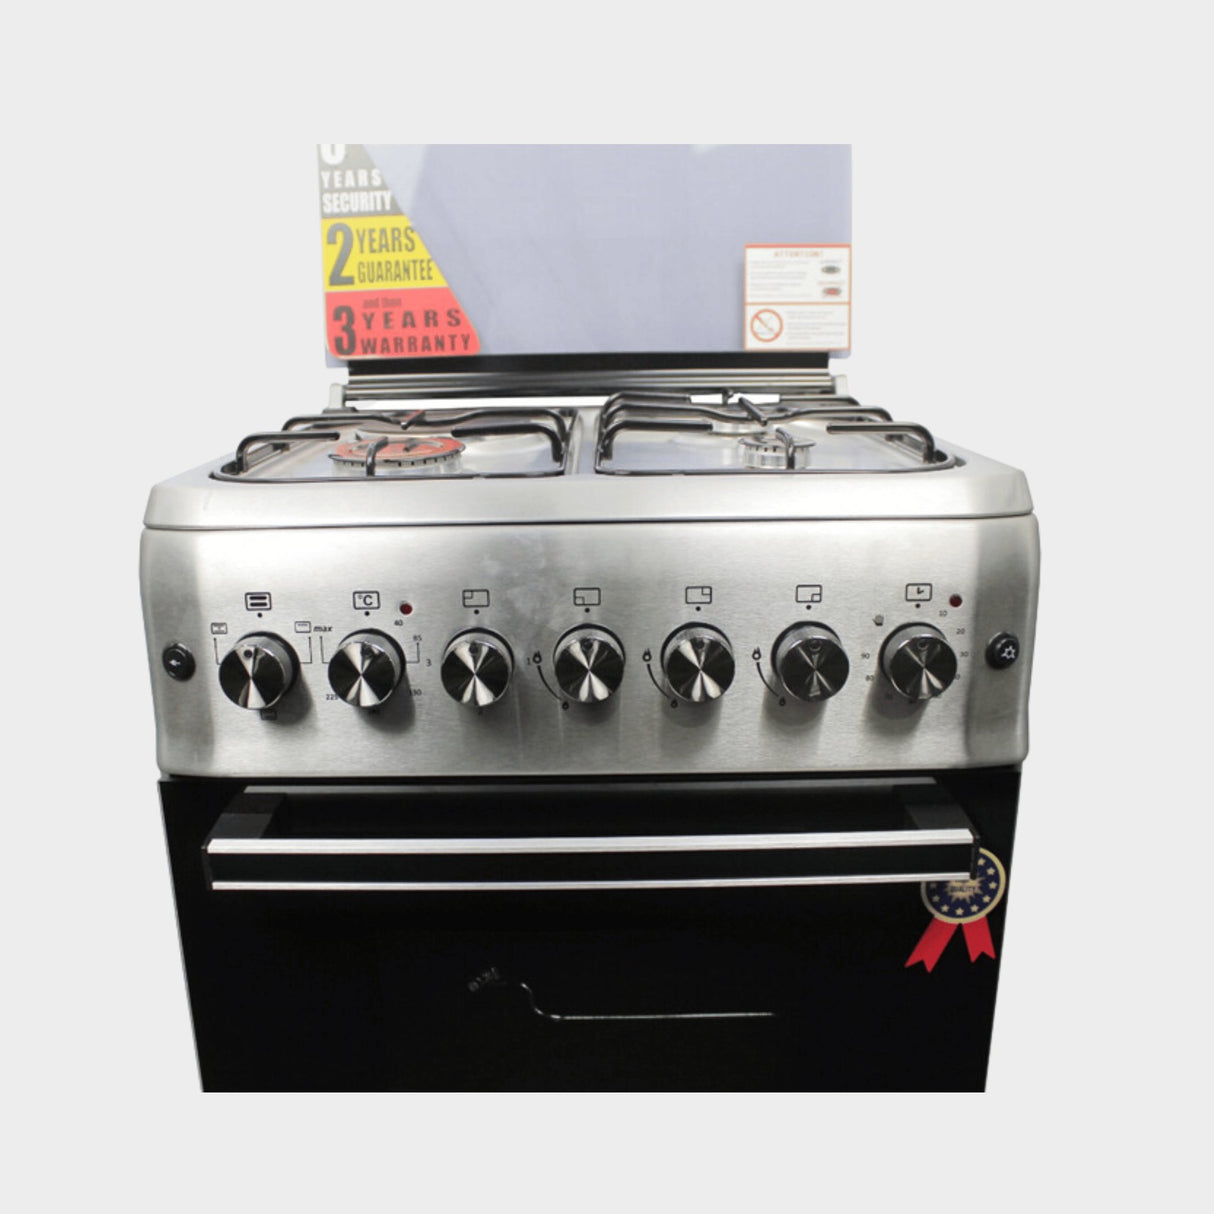 BlueFlame Cooker S6031EFRP, 60x60cm, 3 Gas, 1 Electric, Oven - KWT Tech Mart